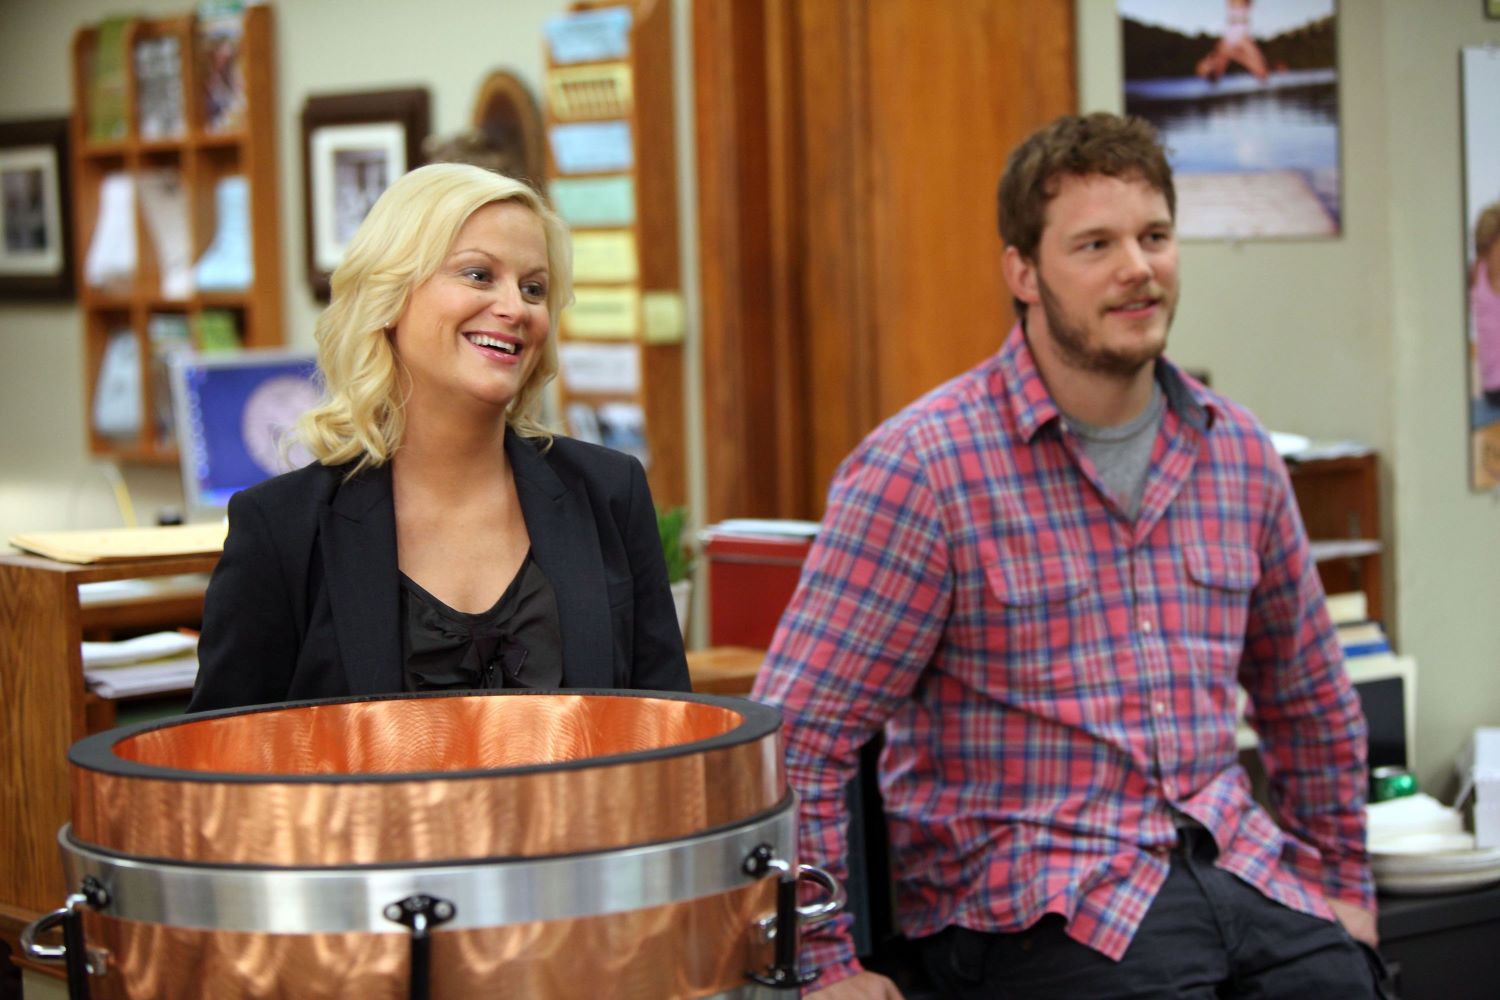 Amy Poehler and Chriss Pratt on 'Parks and Recreation'